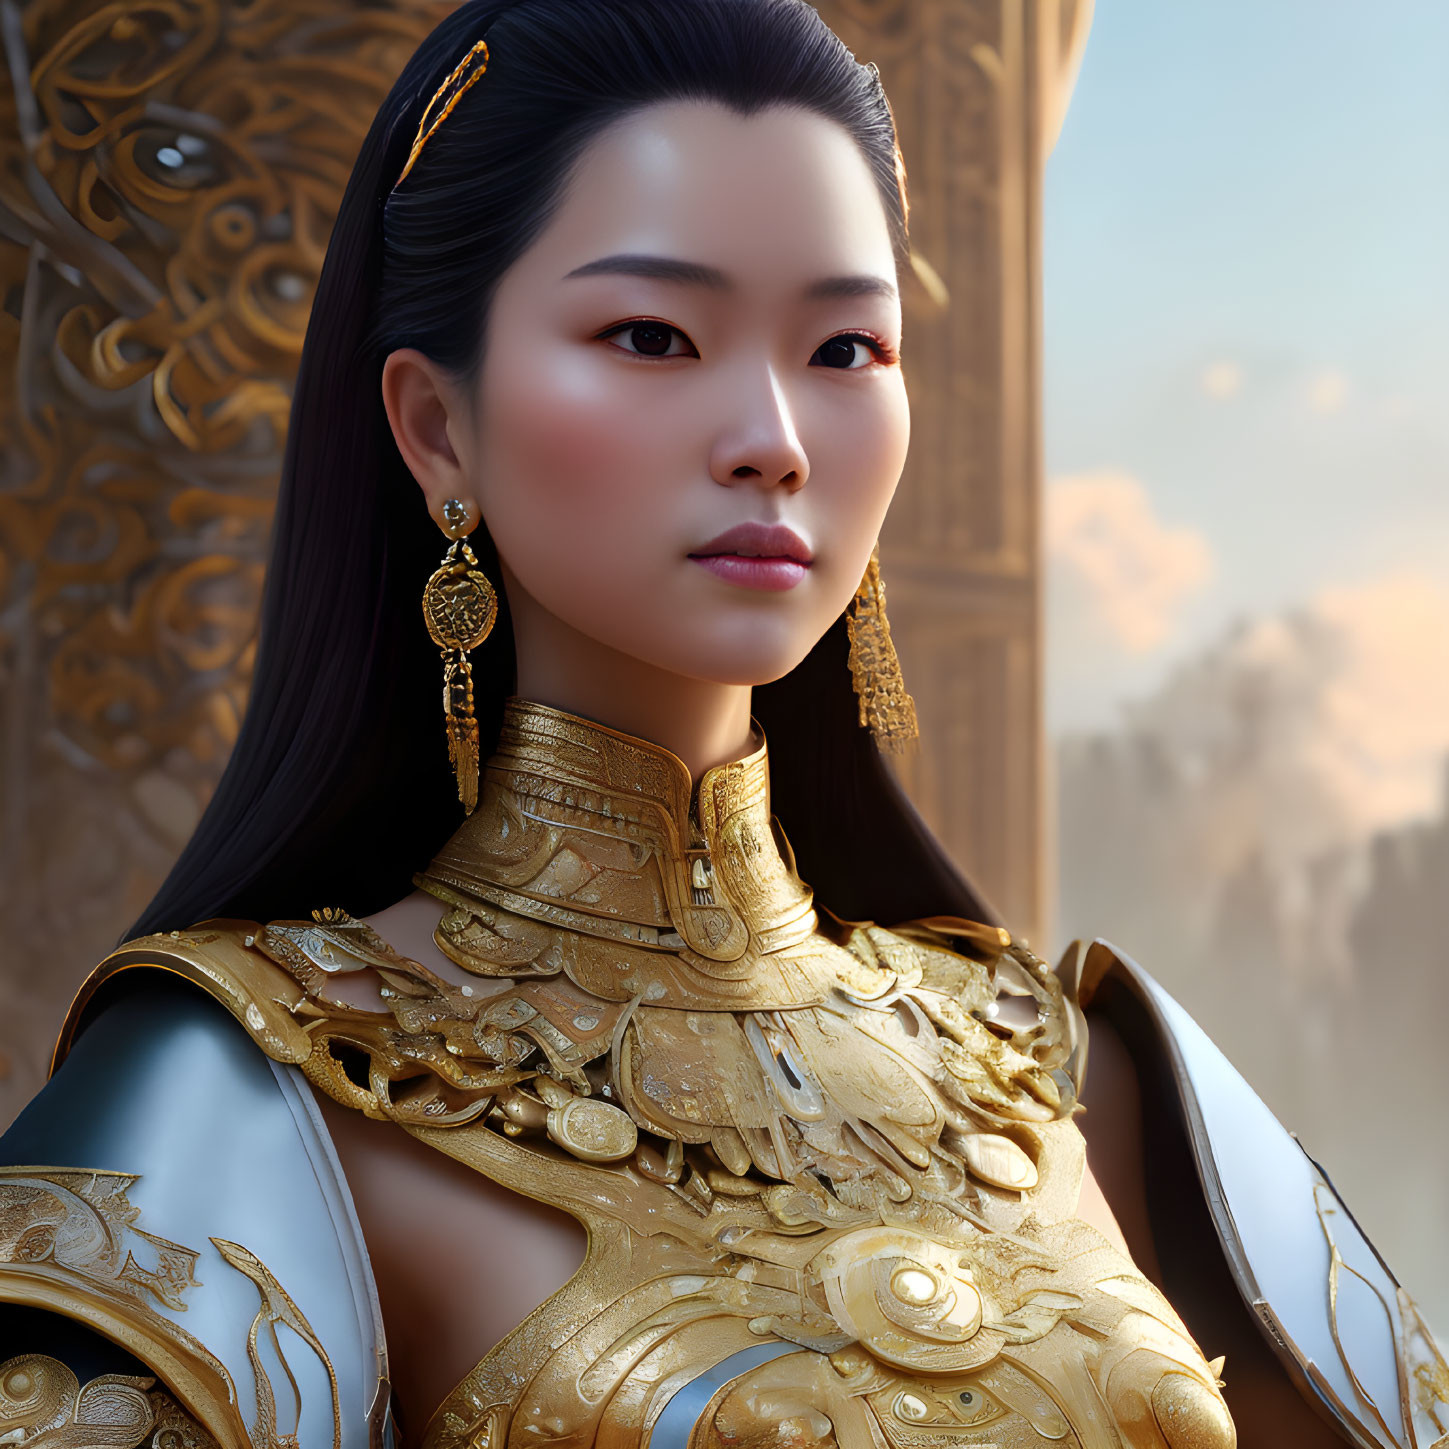 Detailed Illustration: Serene Woman in Gold Jewelry and Armor in Regal Setting